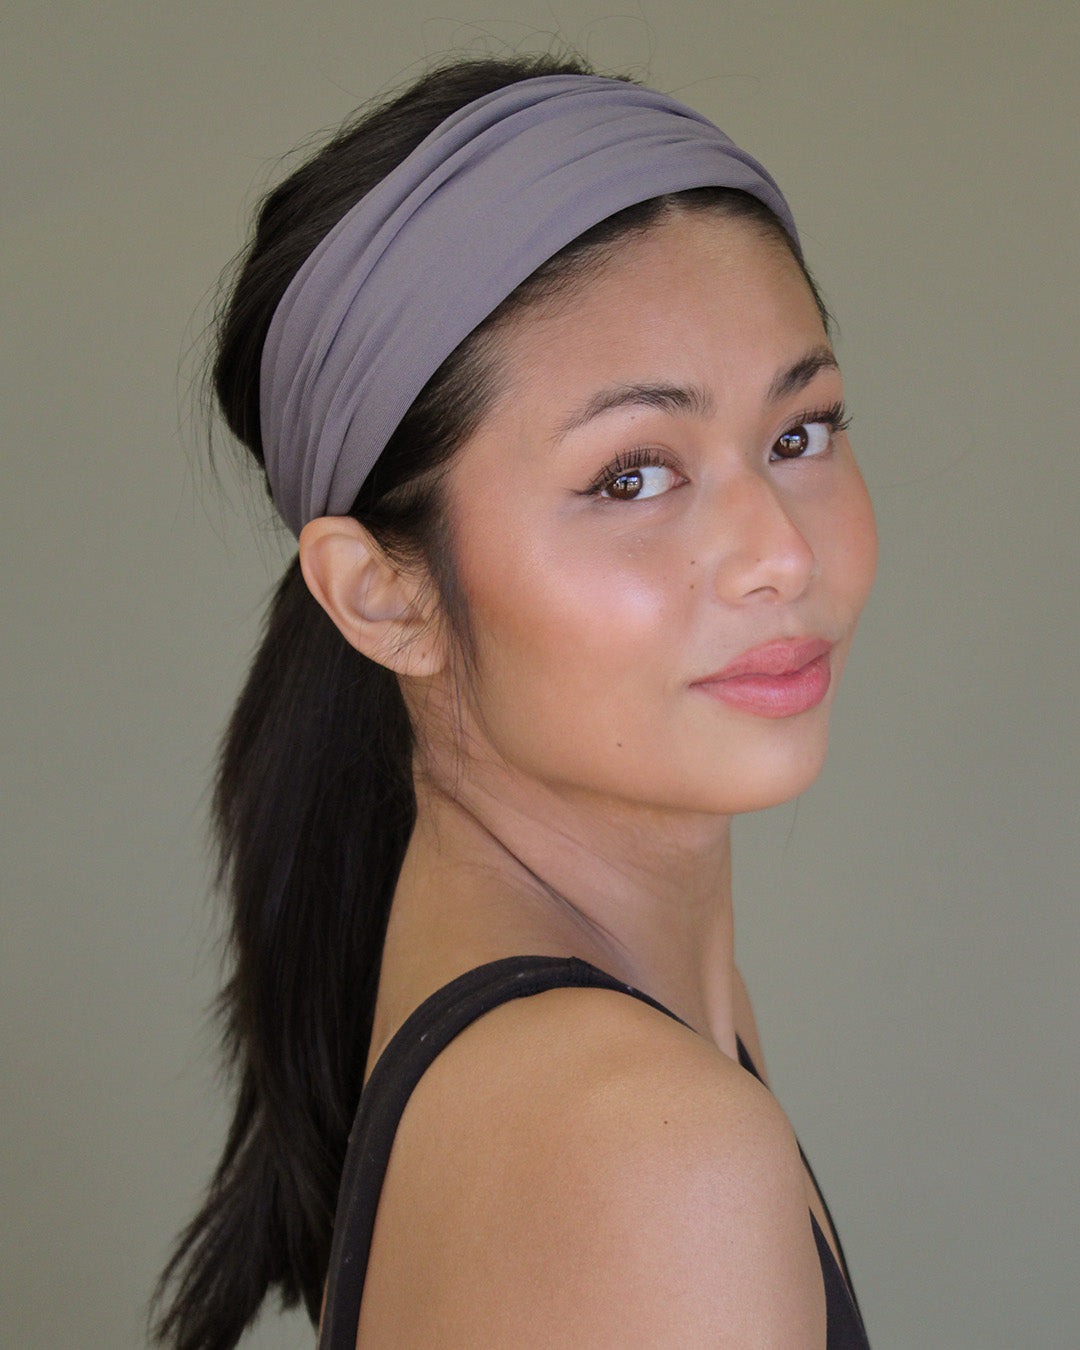 U.S. Army Accelerate Athletic Headband | BANDED Hair Accessories